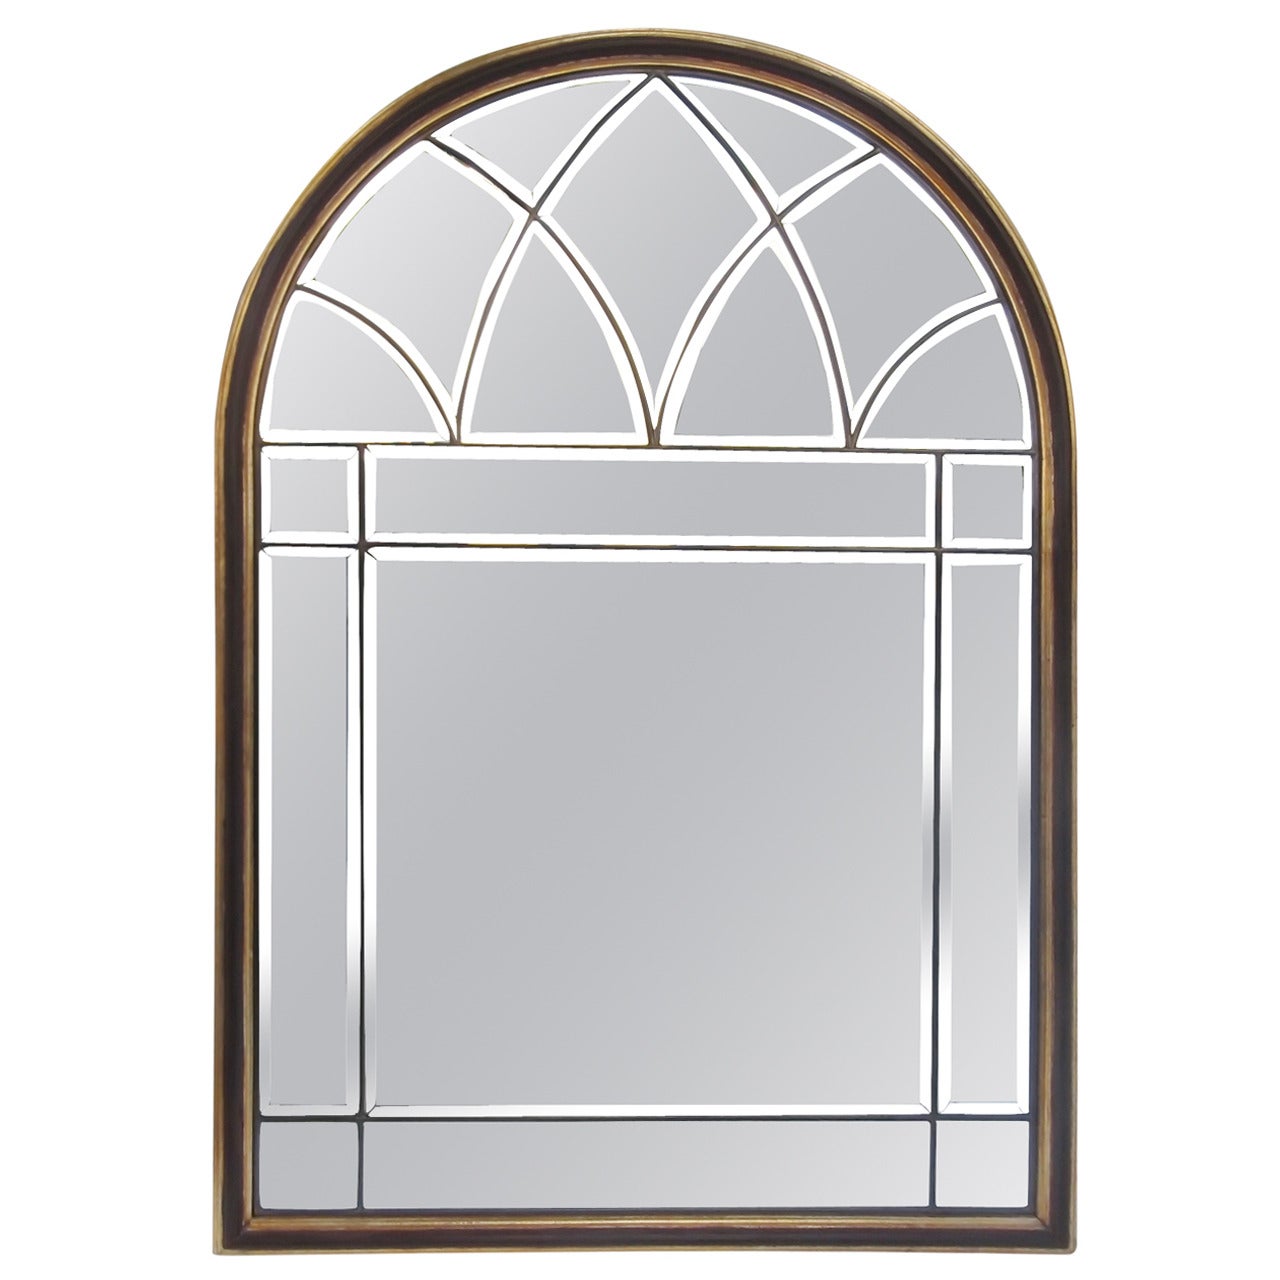 Italian Midcentruy Window Style Arched-Top Beveled Mirror